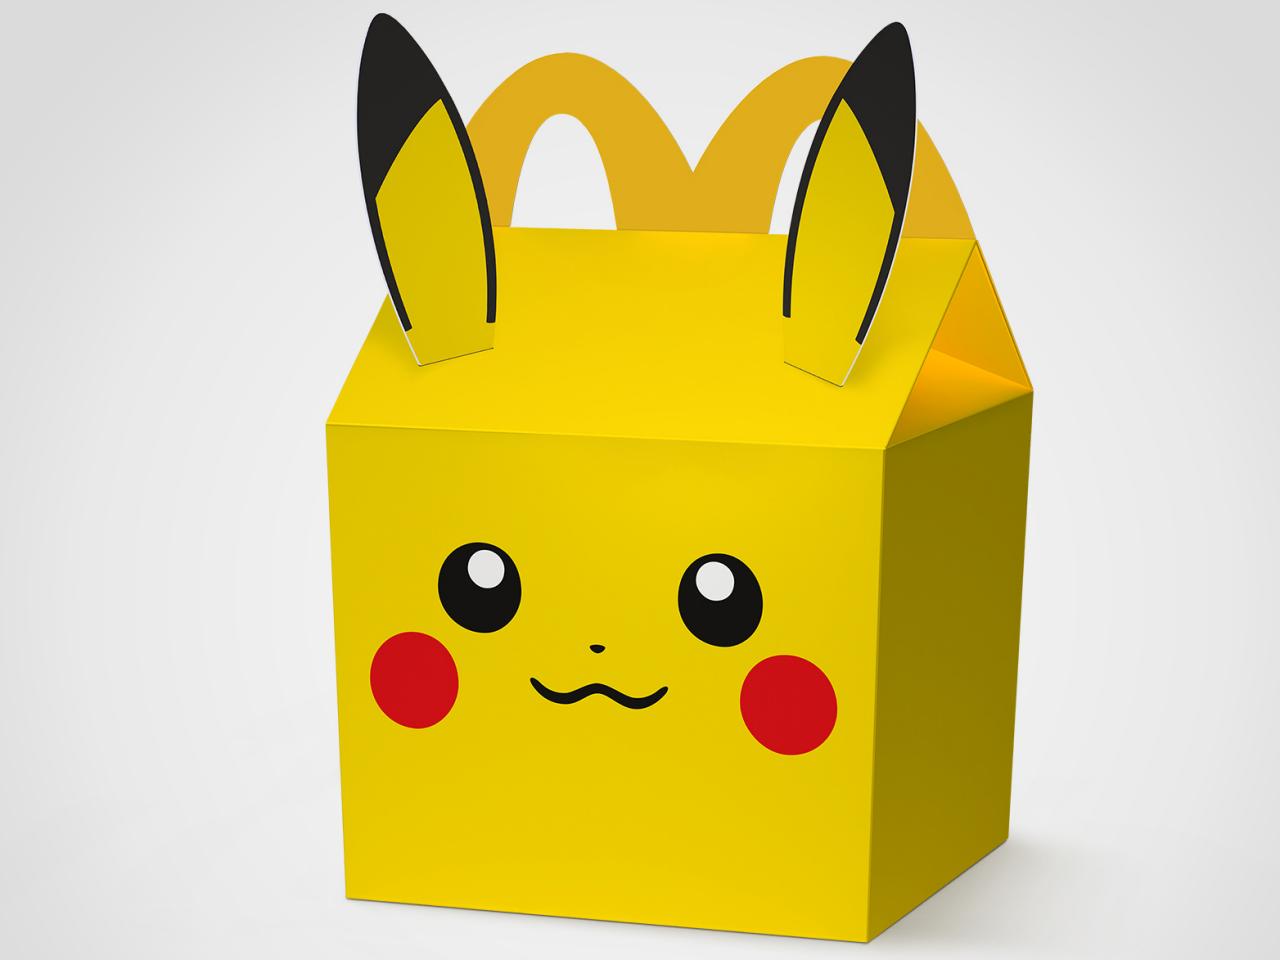 The McDonald's Pokemon collaboration for 2023 has appeared online